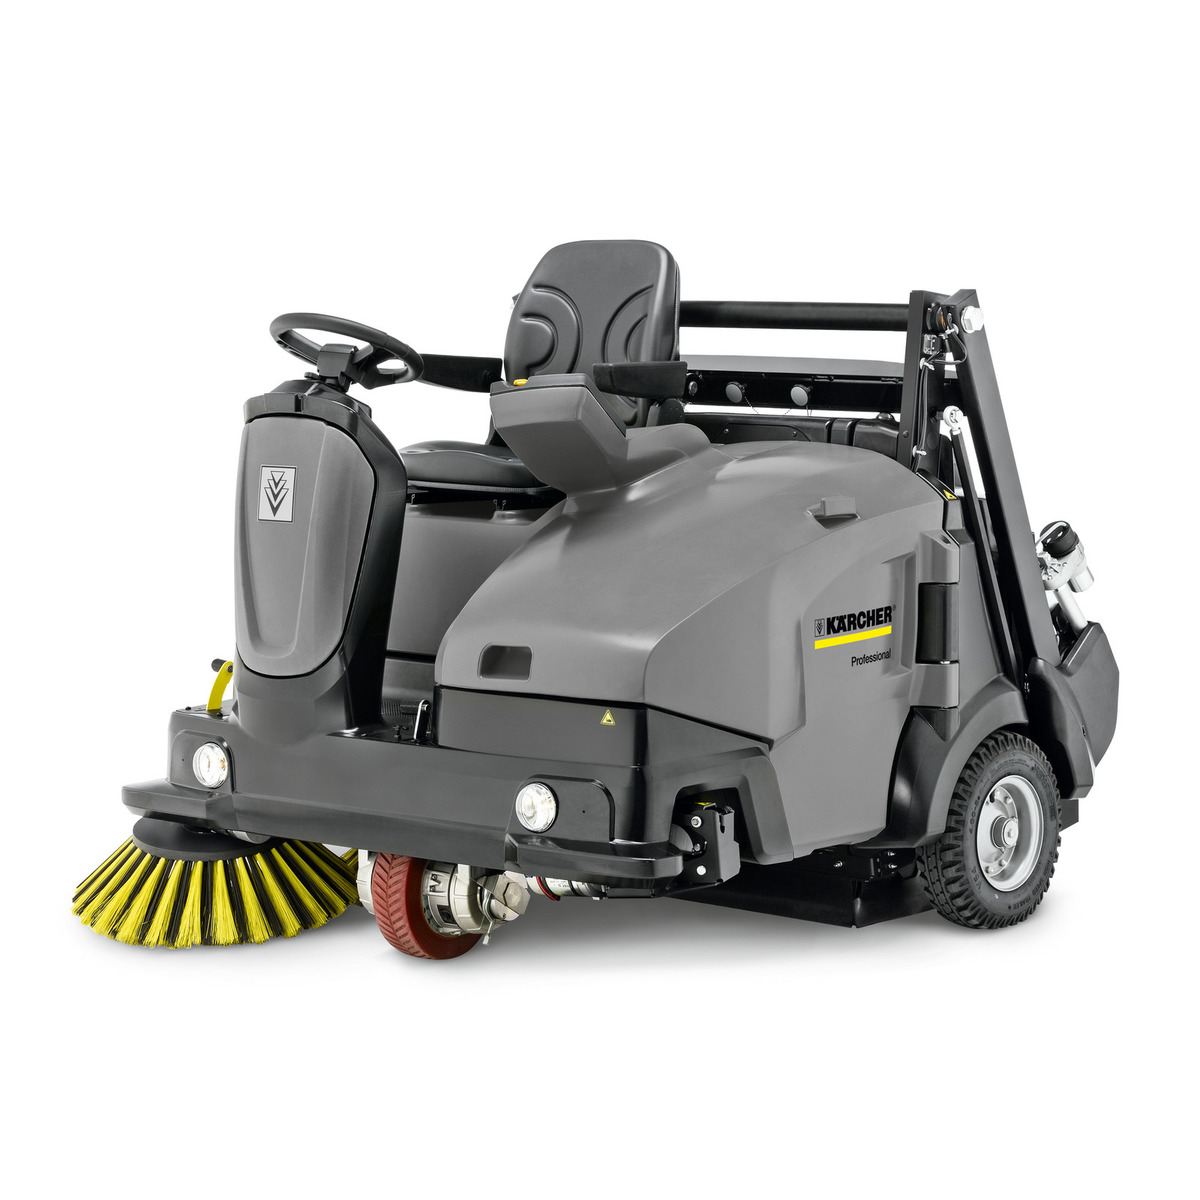 Other cleaning machines